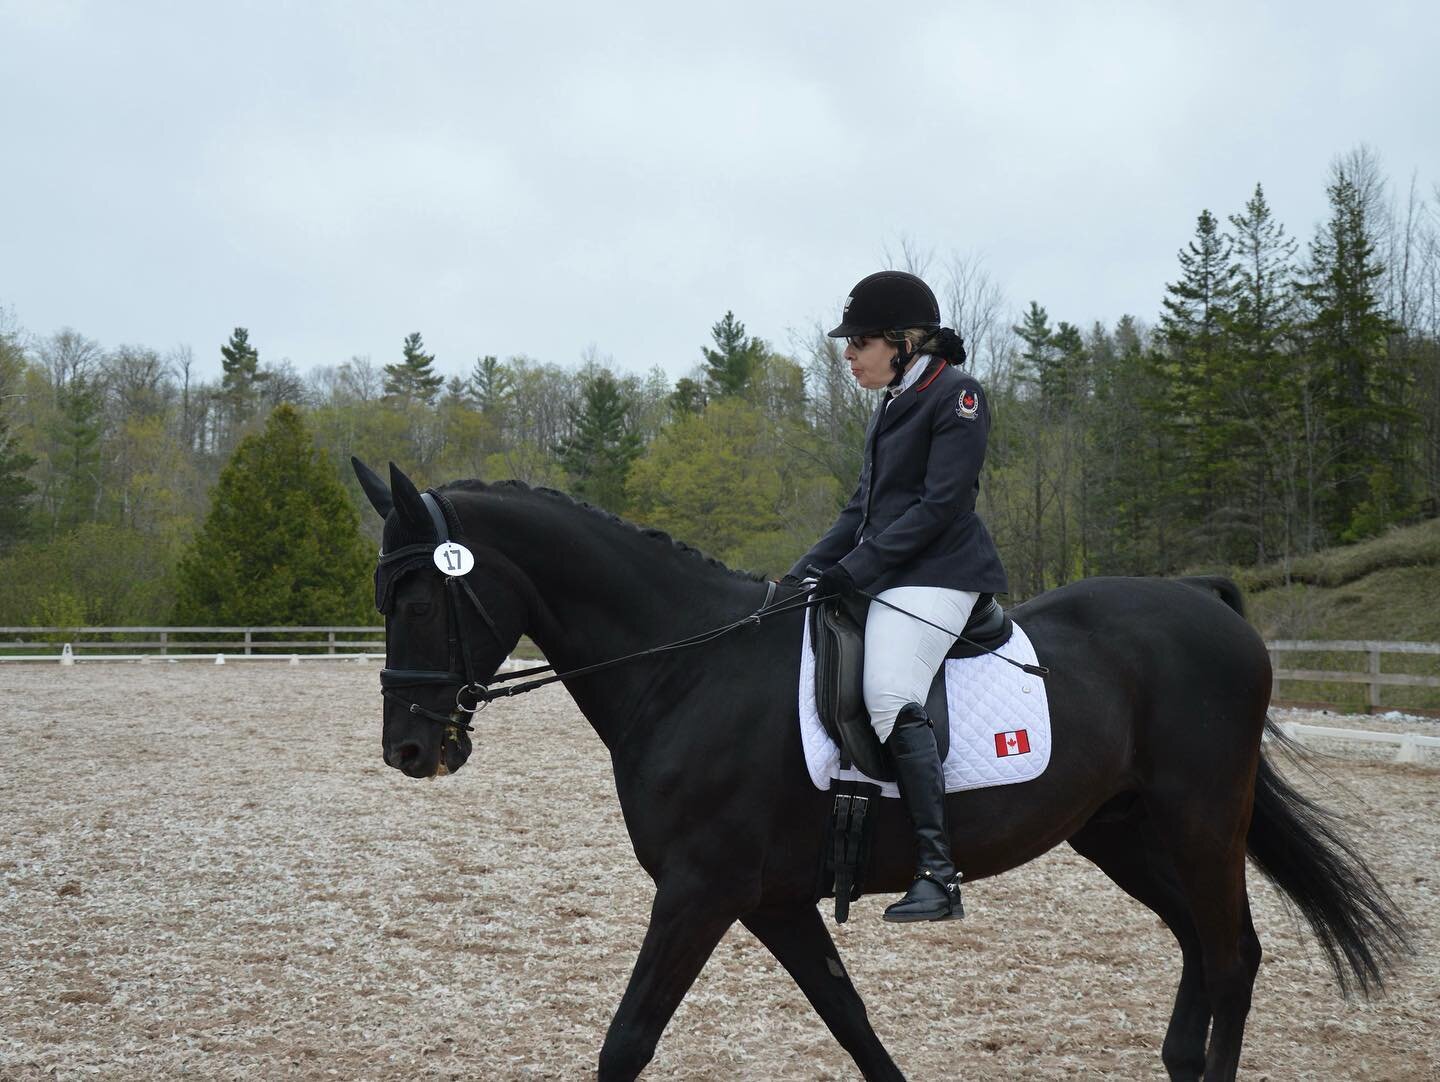 We saw Saddlewood alumni Jody Schloss at the Cadora Dressage show on the weekend of May 6-7th. Jody attended Saddlewood Camp 35 years ago! Congrats on your great test! We love to see our alumni and their riding accomplishments.